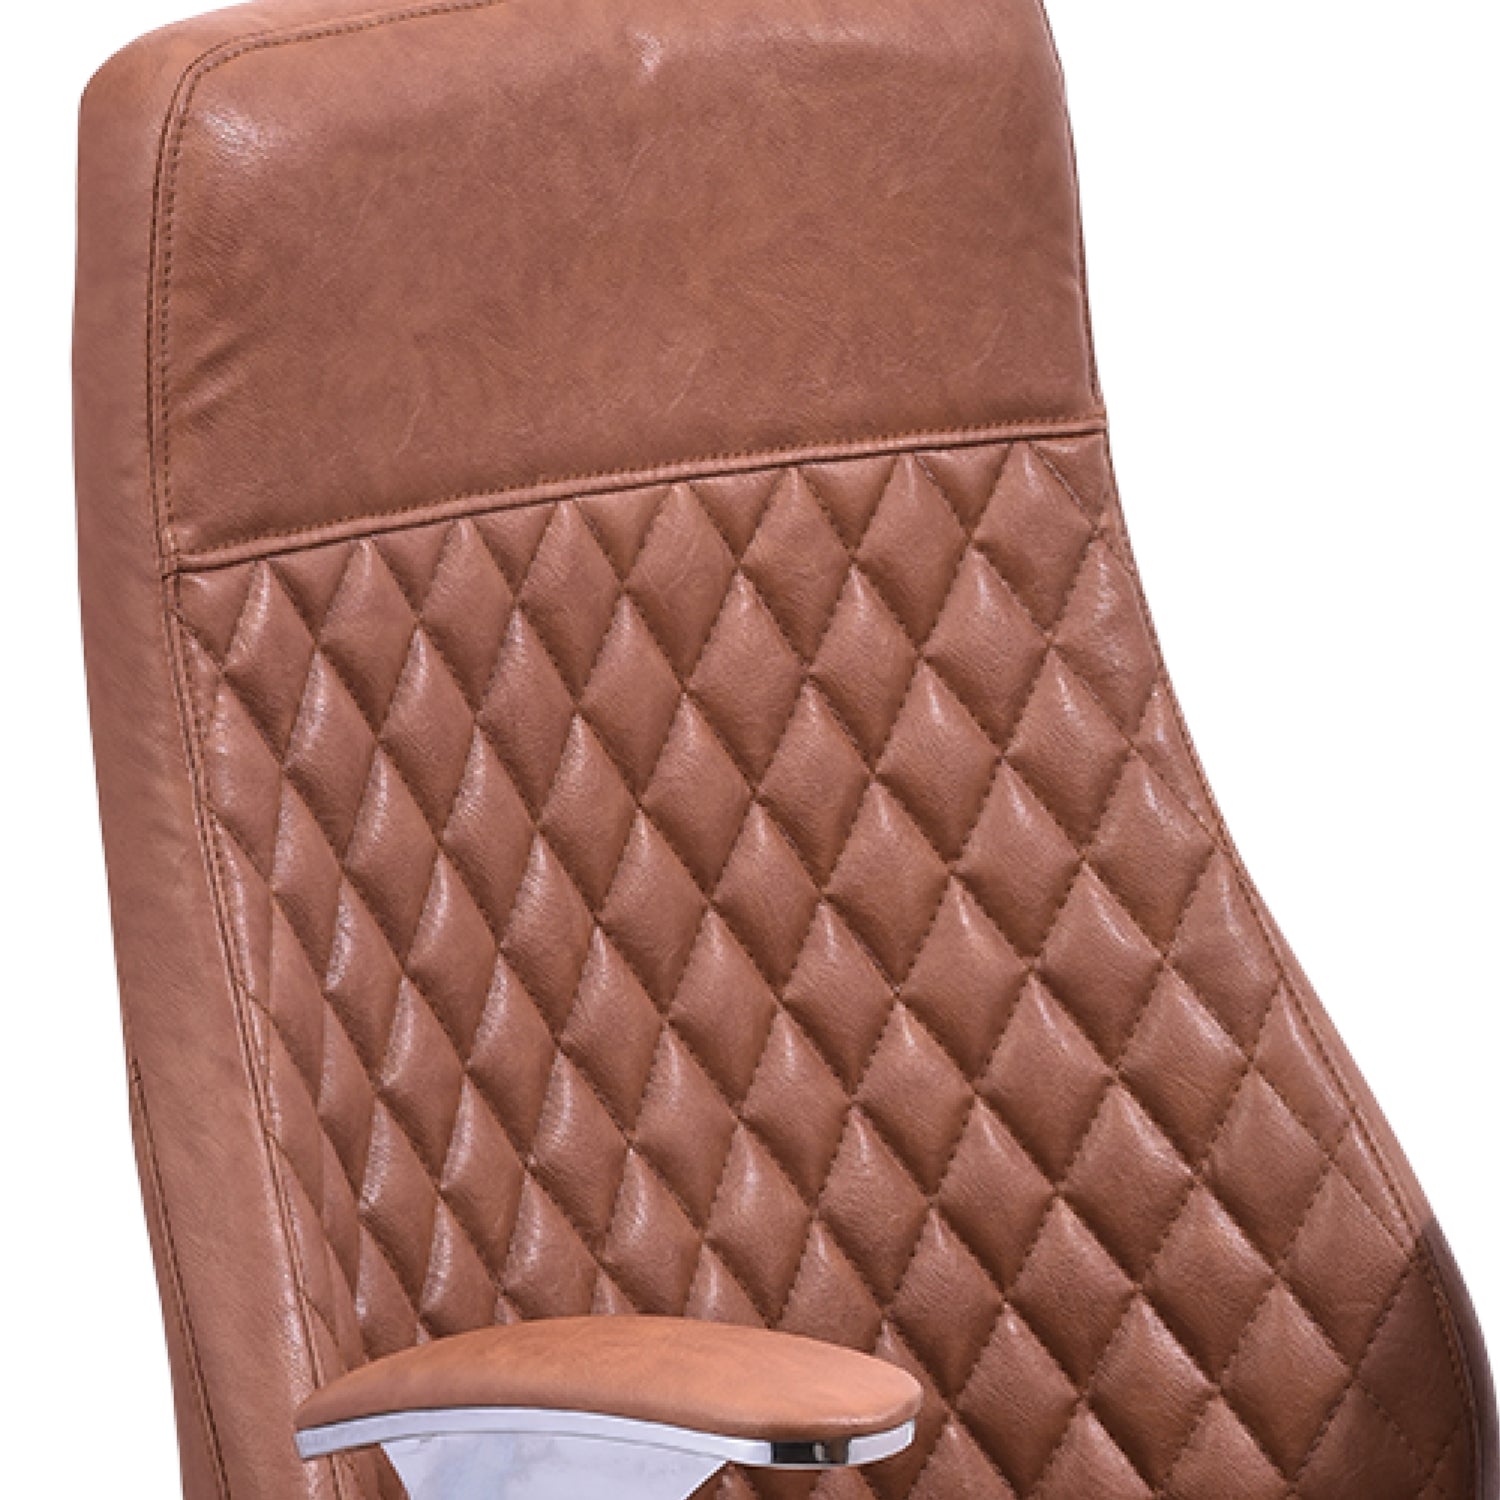 ZFB1003 High Back Chair by Zorin in Tan Color Zorin